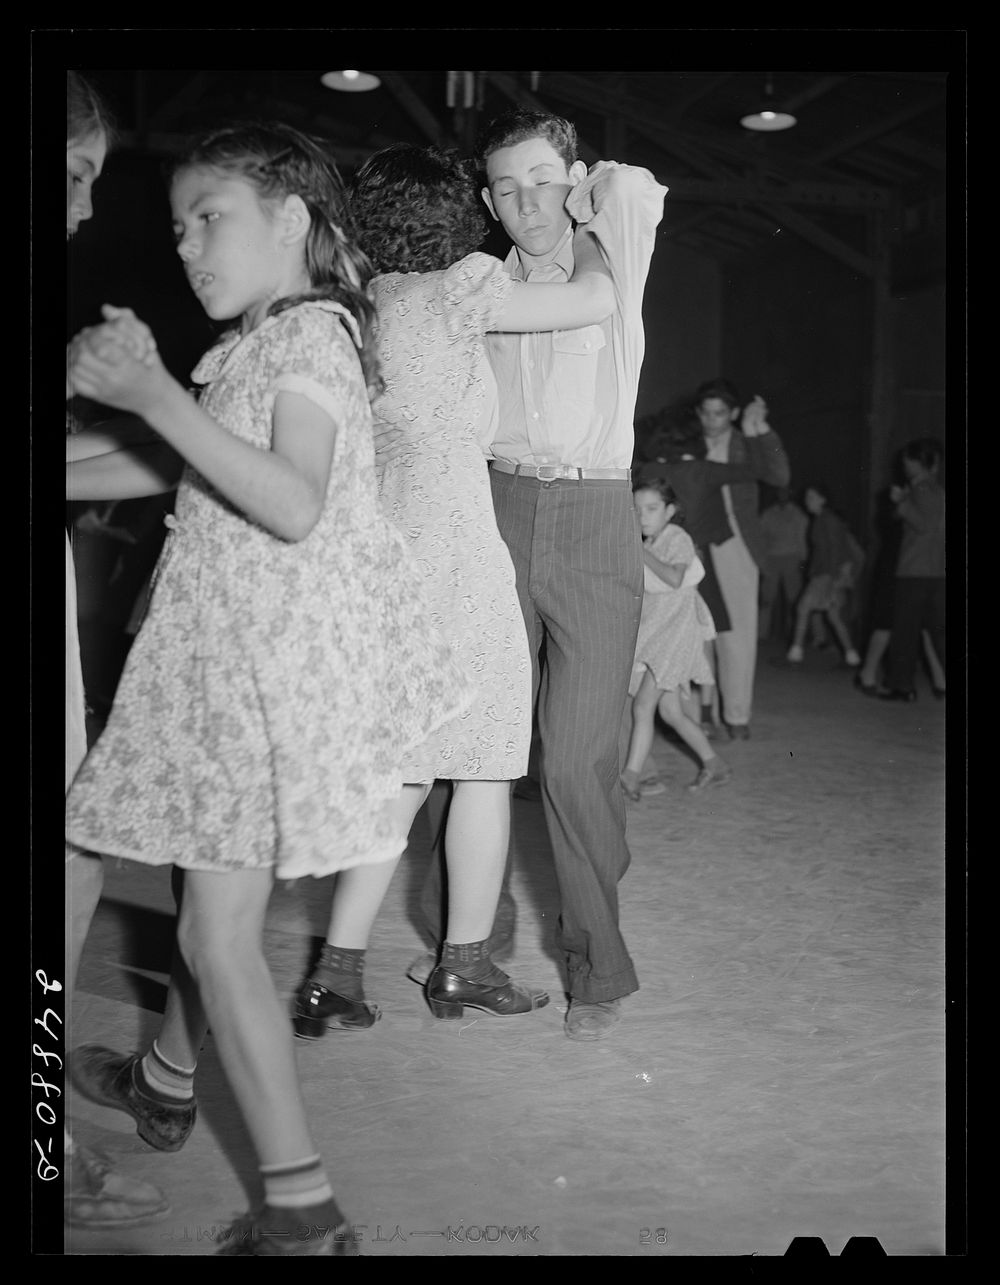 [Untitled photo, possibly related to: Saturday night dance. Community center. Robstown camp, Texas]. Sourced from the…